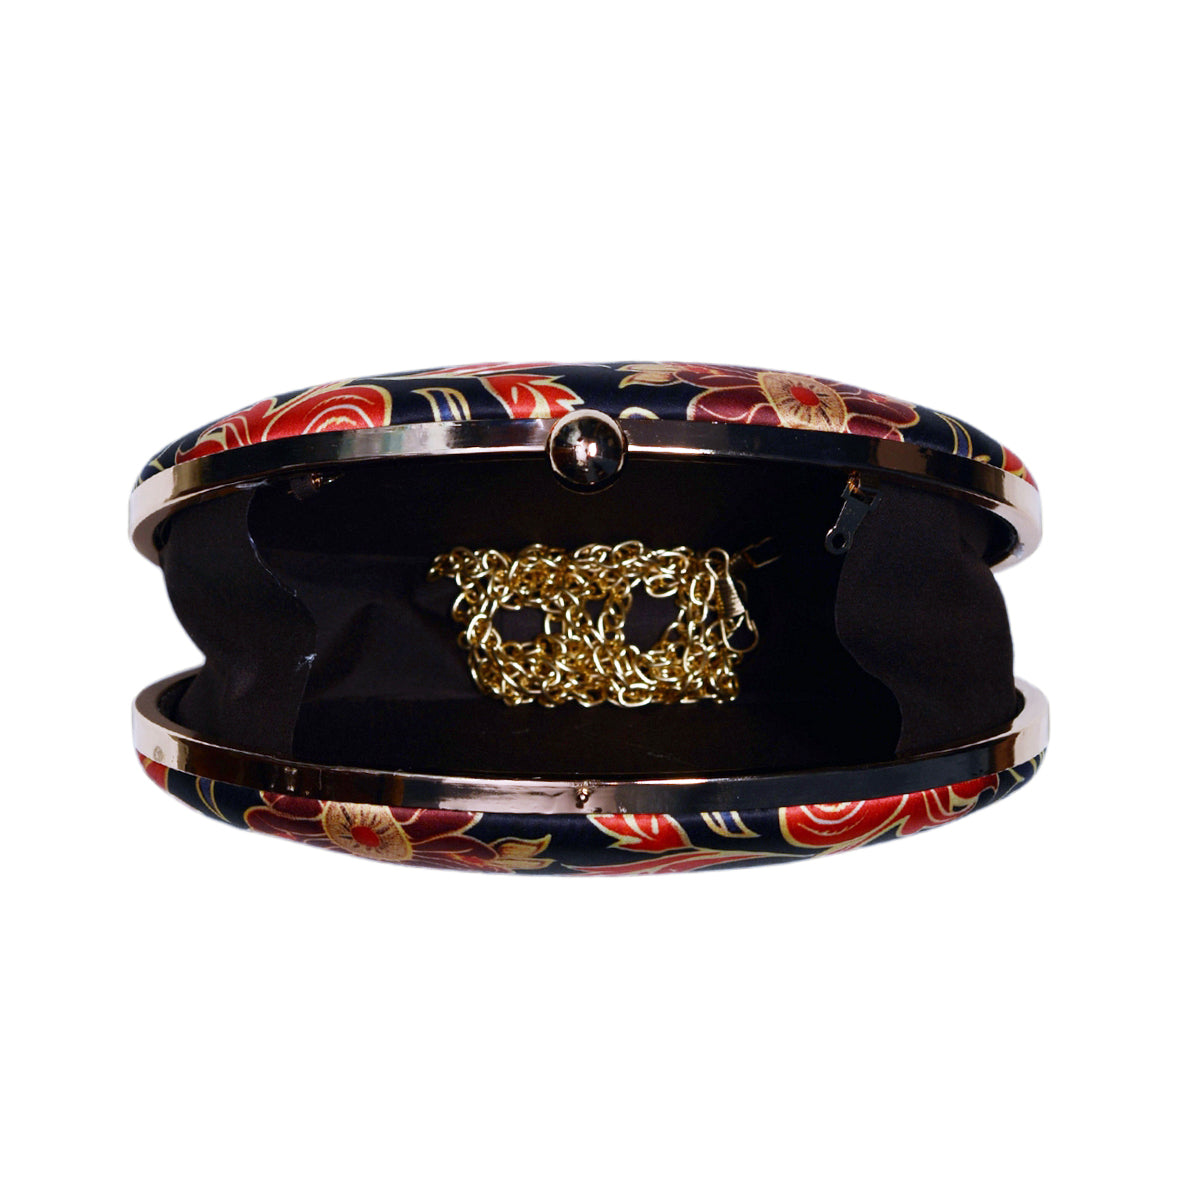 Red And Golden Floral Printed Oval Clutch